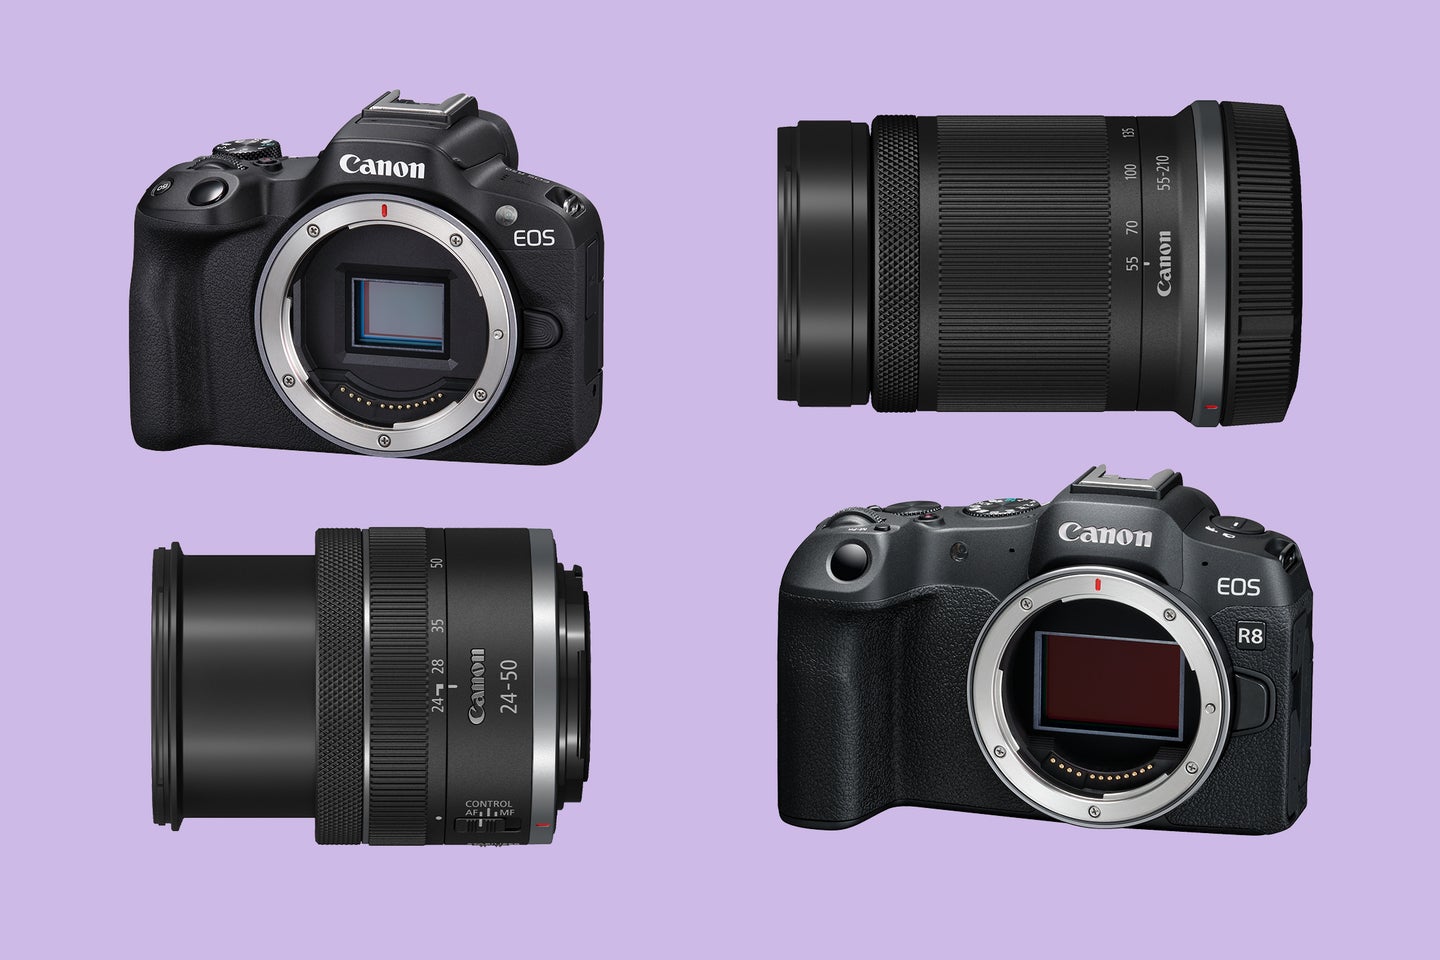 Canon EOS R50, R8, 24-50mm, and 55-210mm